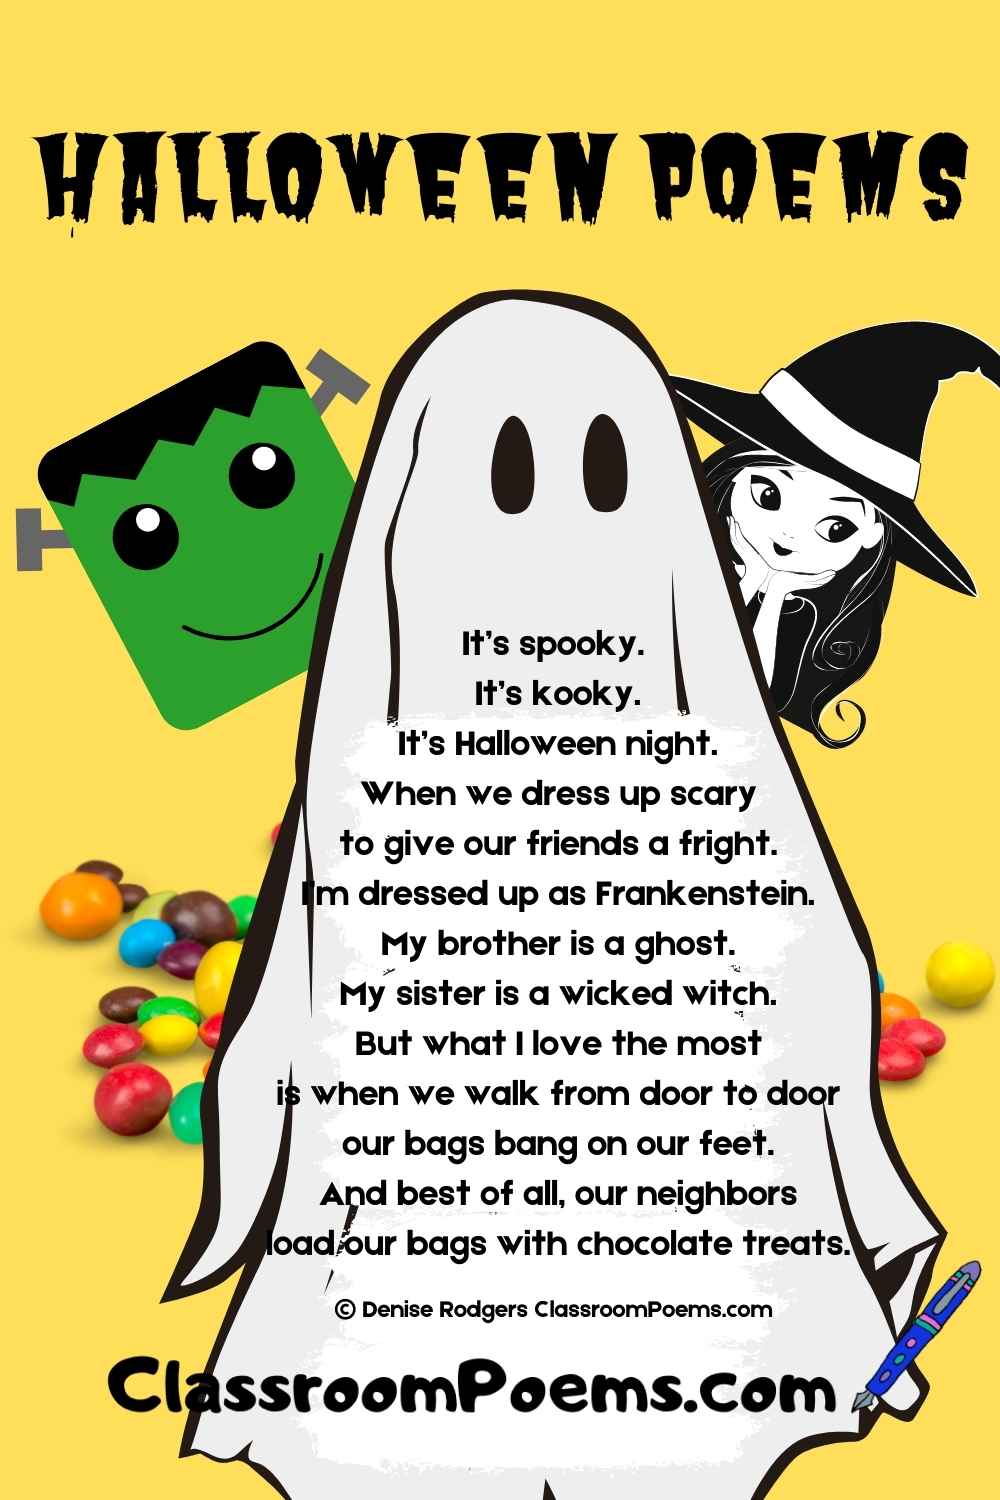 Halloween Poems for kids by Denise Rodgers on ClassroomPoems.com.